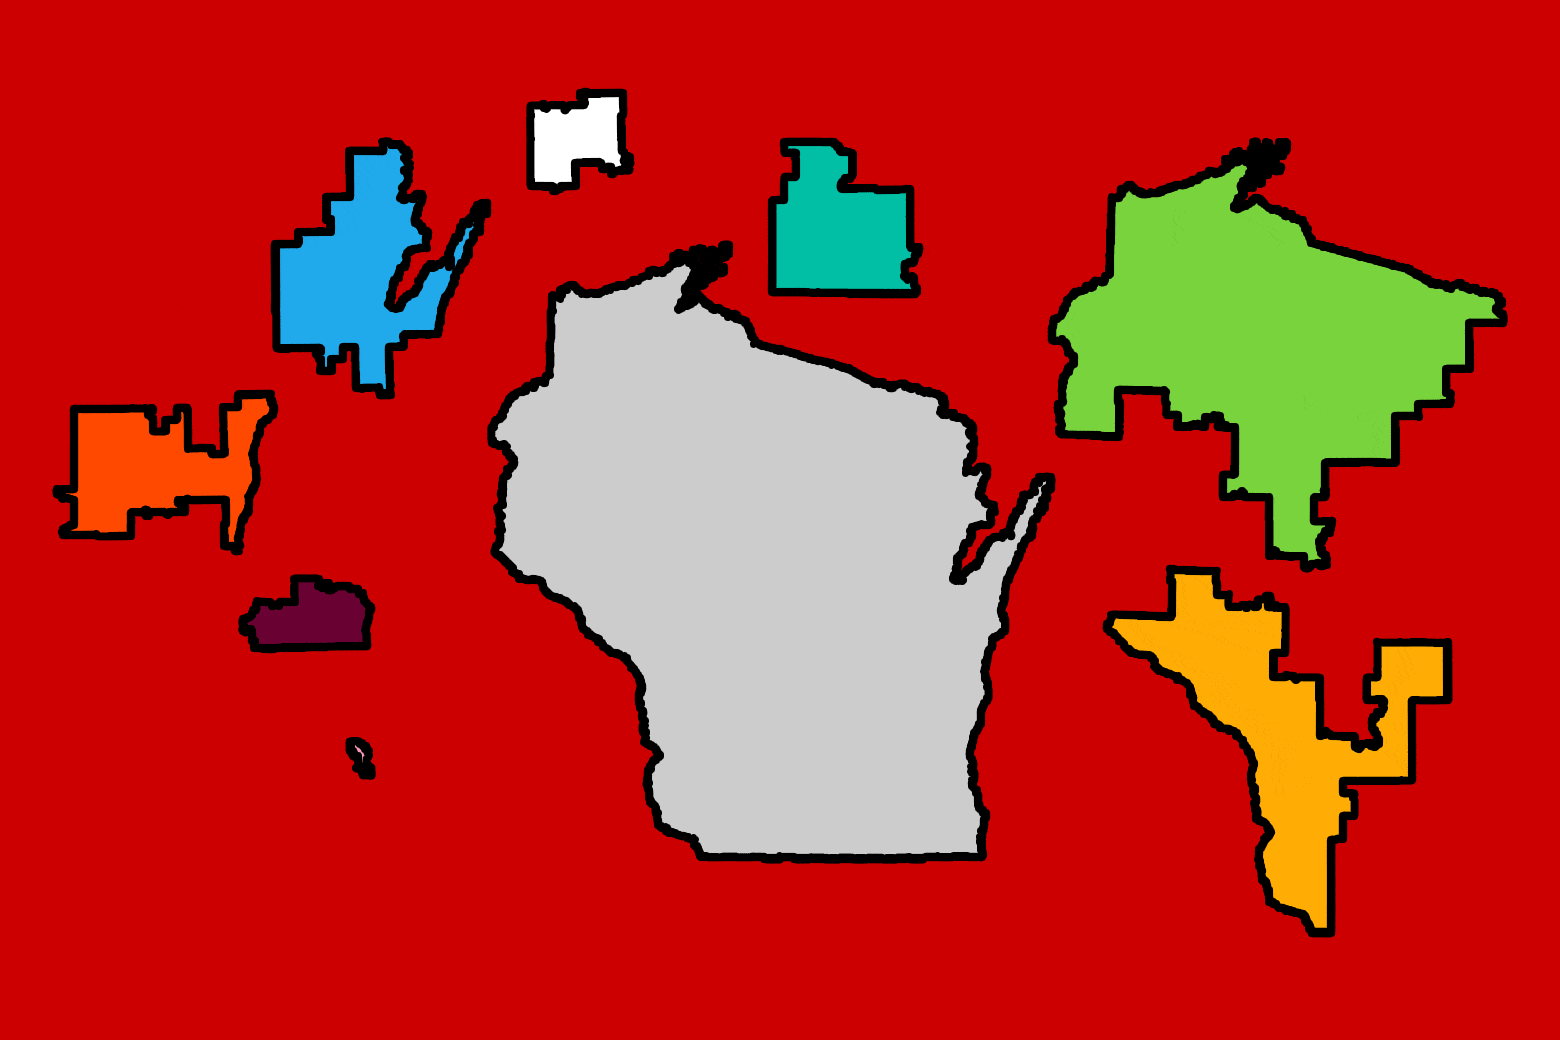 Drawn Wisconsin districts are scattered around an outline of the state, with one being dragged within the state's borders like a puzzle piece.